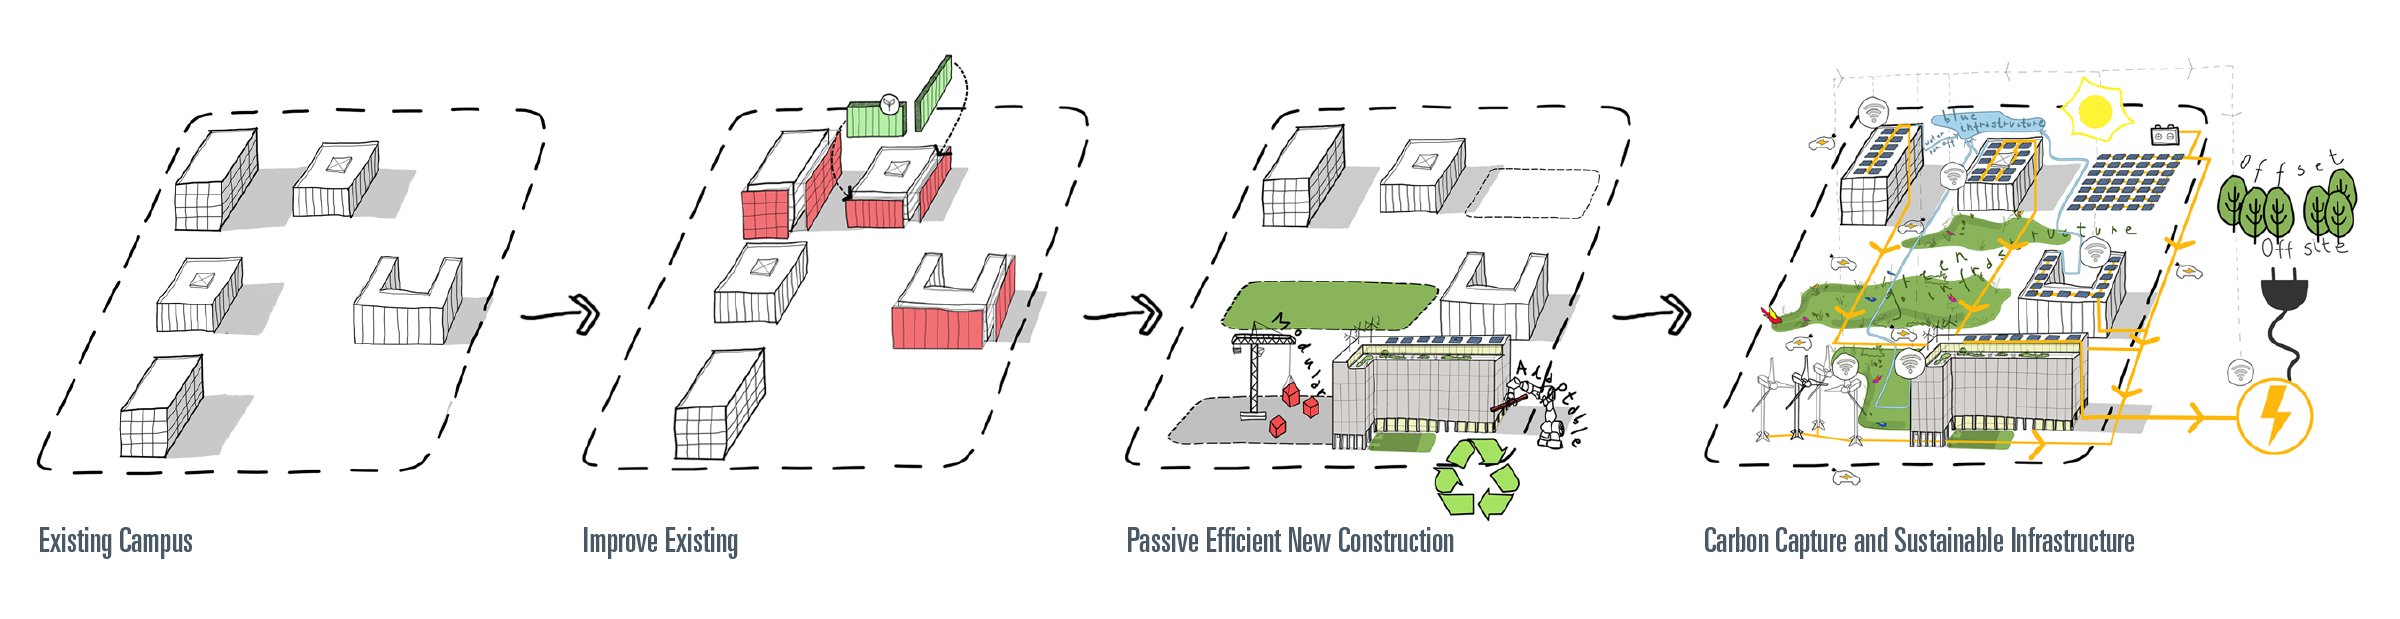 A series of sketches illustrating ways that the campus can transition towards a Net Zero Carbon future. Existing Campus, Improve Campus, Passive Efficient New Construction, Carbon Capture and Sustainable Infrastructure